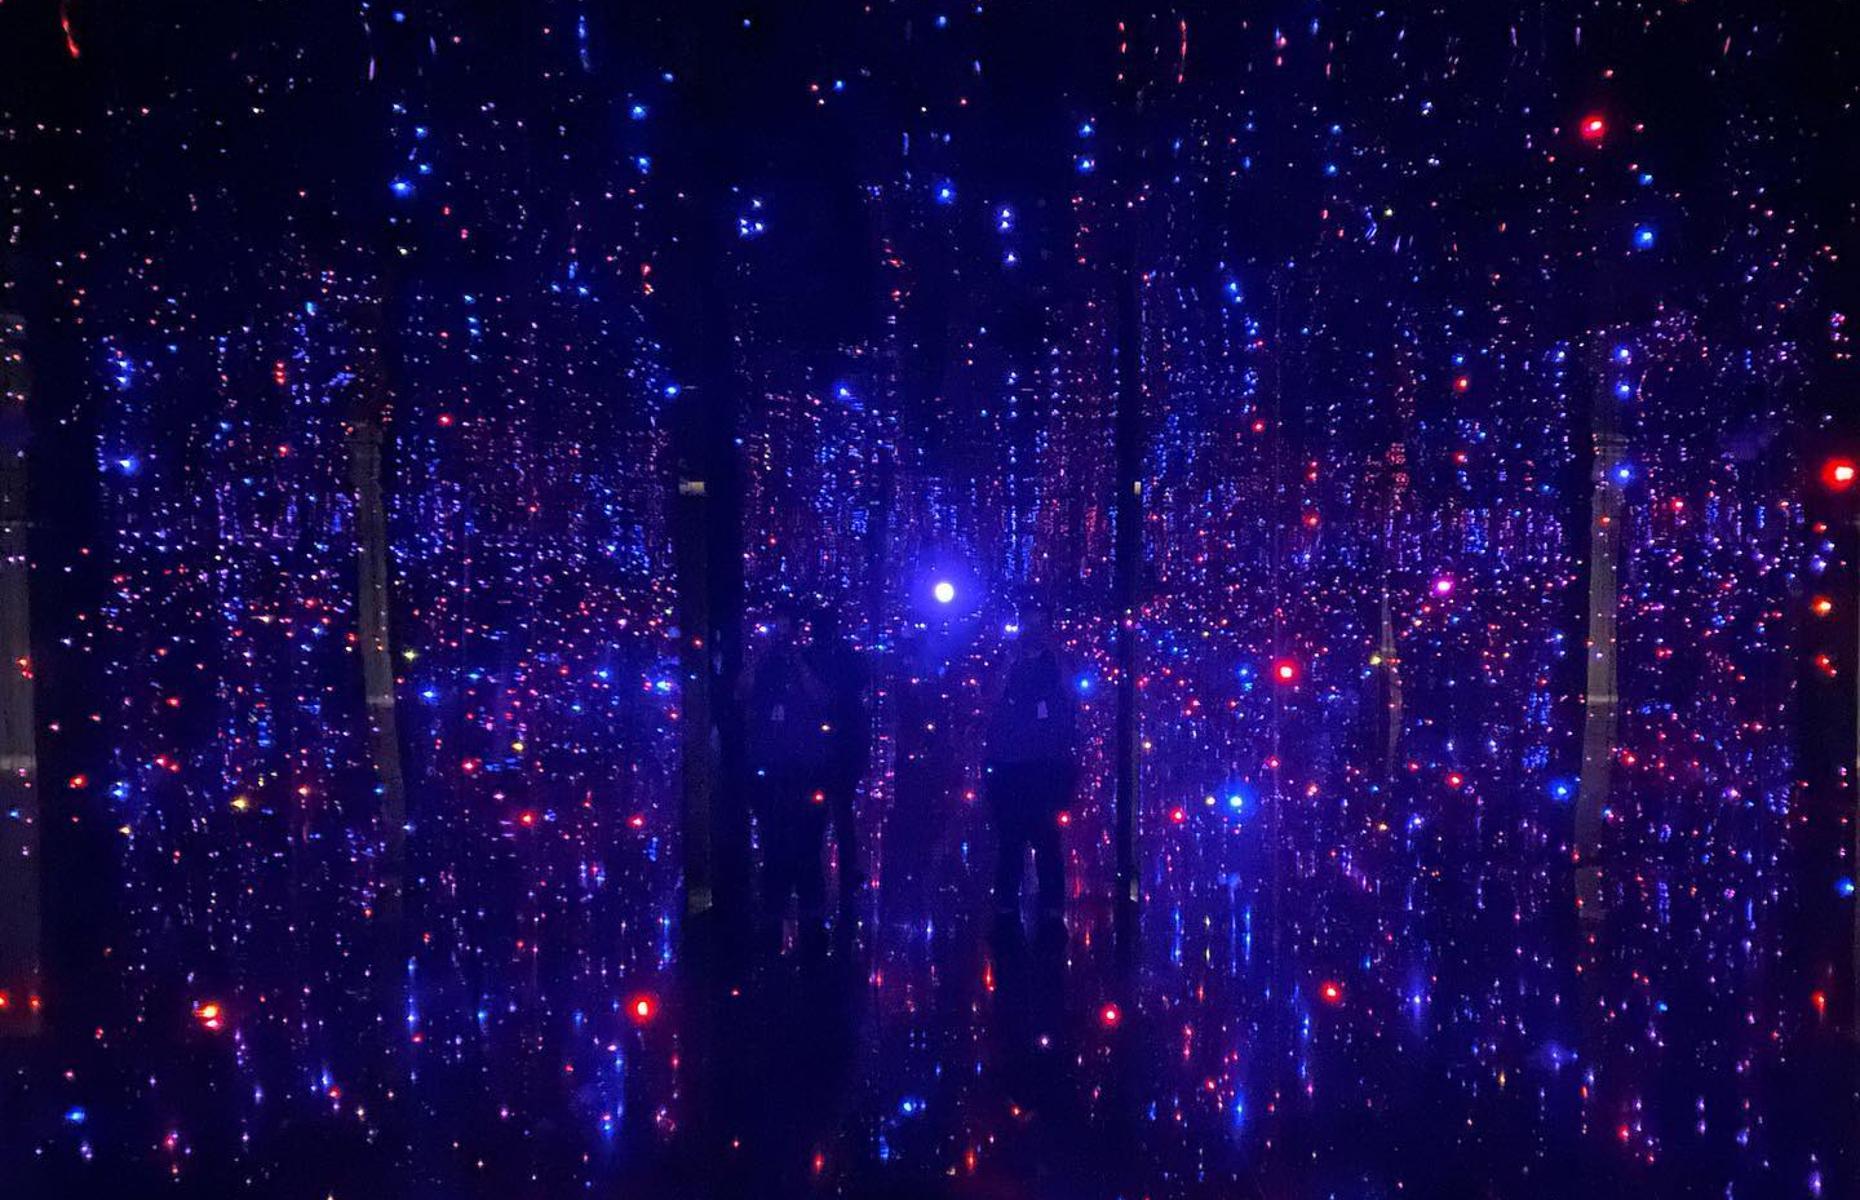 <p>The largest art gallery in the southwestern US, <a href="https://phxart.org/">Phoenix Art Museum</a> is home to some 20,000 works and artifacts. But one of its main draws is the permanent Yayoi Kusama exhibition (pictured), which has the rather poetic title: ‘You who are getting obliterated in the dance swarm of fireflies’. Fitting with the name, the installation consists of a dark room filled with mirrors and cascading LED light strings, making you feel as if you’ve walked into a huge and enchanting forest of lights. Elsewhere in the gallery, you’ll find a large collection of Monet paintings and a dolls'-house-like collection of miniature rooms known as the Thorne Rooms. </p>